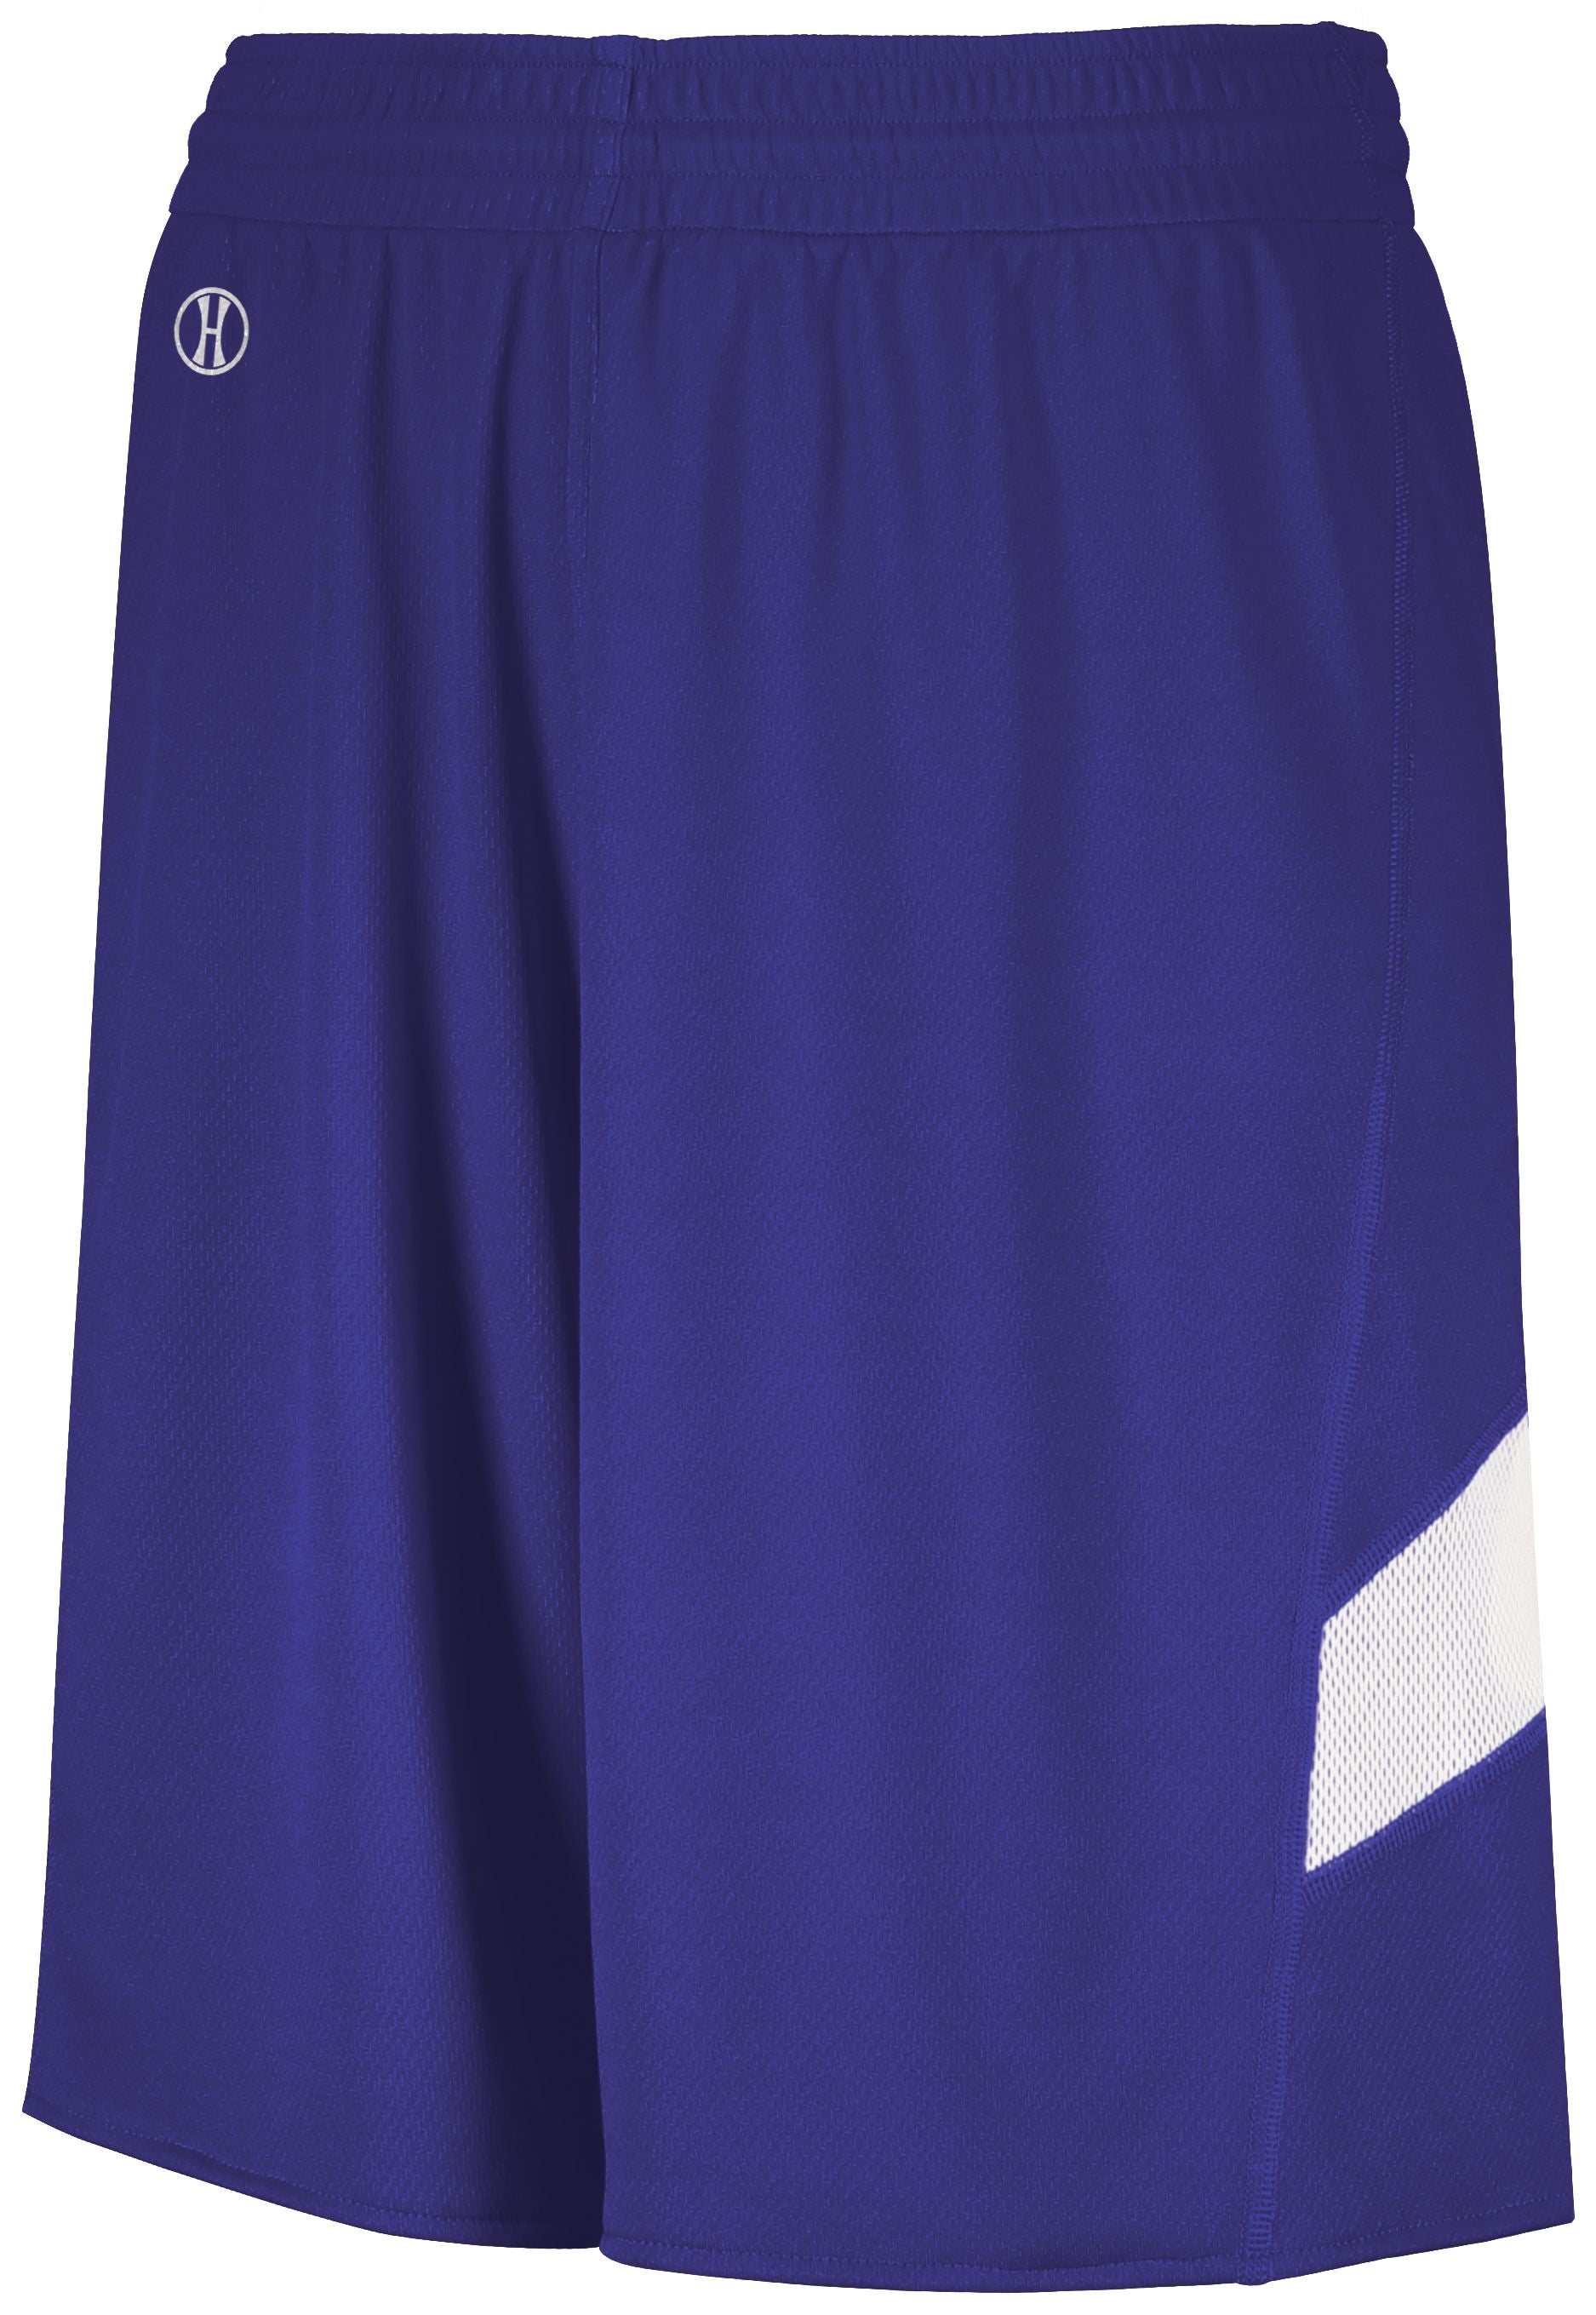 Holloway Youth Dual-Side Single Ply Basketball Shorts in Purple/White  -Part of the Youth, Youth-Shorts, Basketball, Holloway, All-Sports, All-Sports-1 product lines at KanaleyCreations.com